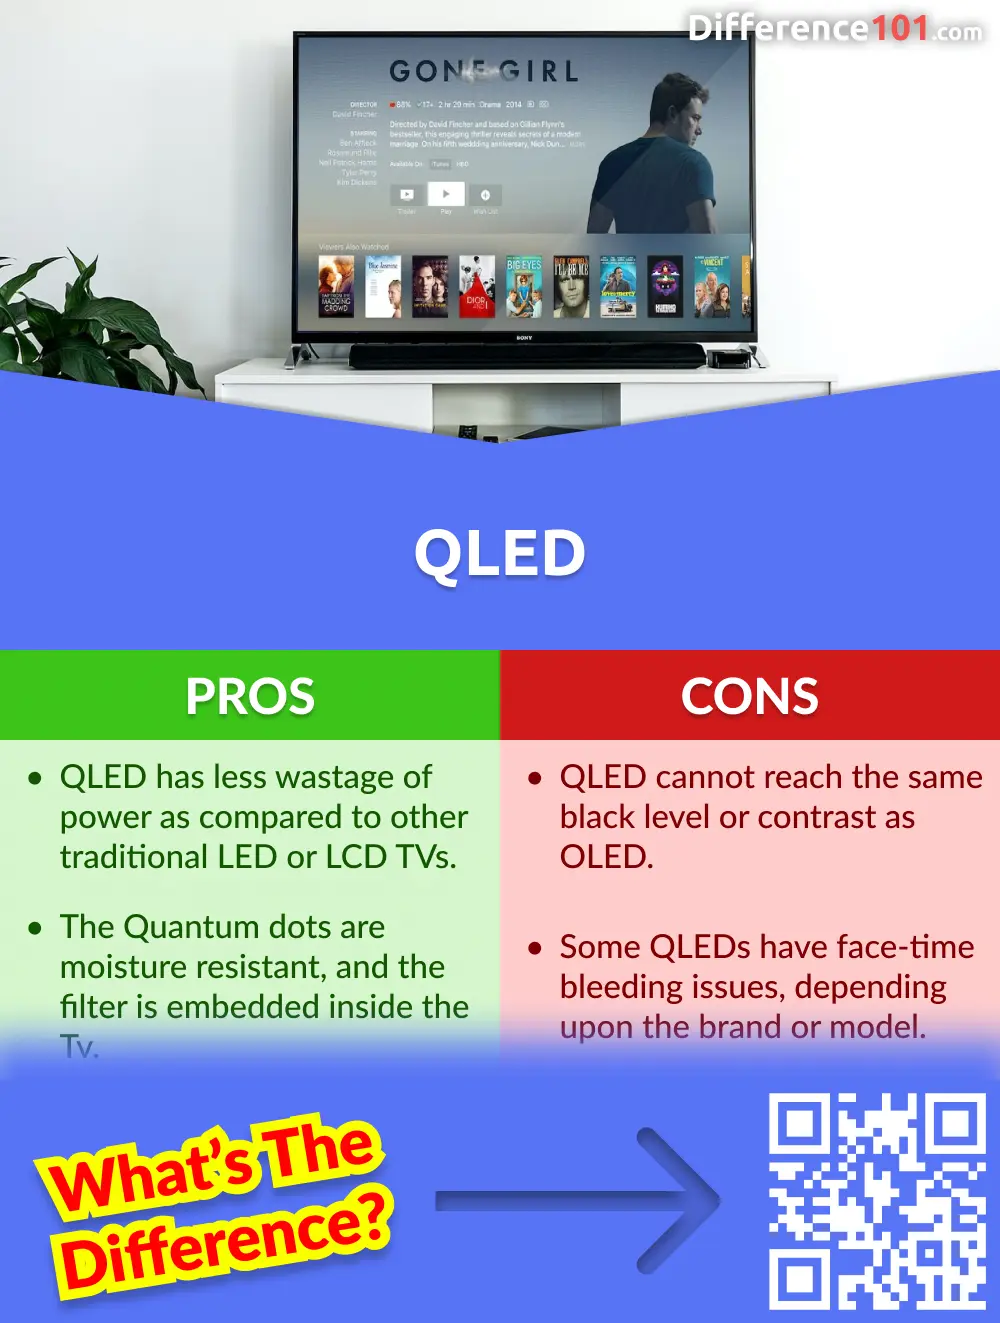 logo uøkonomisk midtergang Crystal UHD vs. QLED vs. OLED: What's The Difference Between | Difference  101